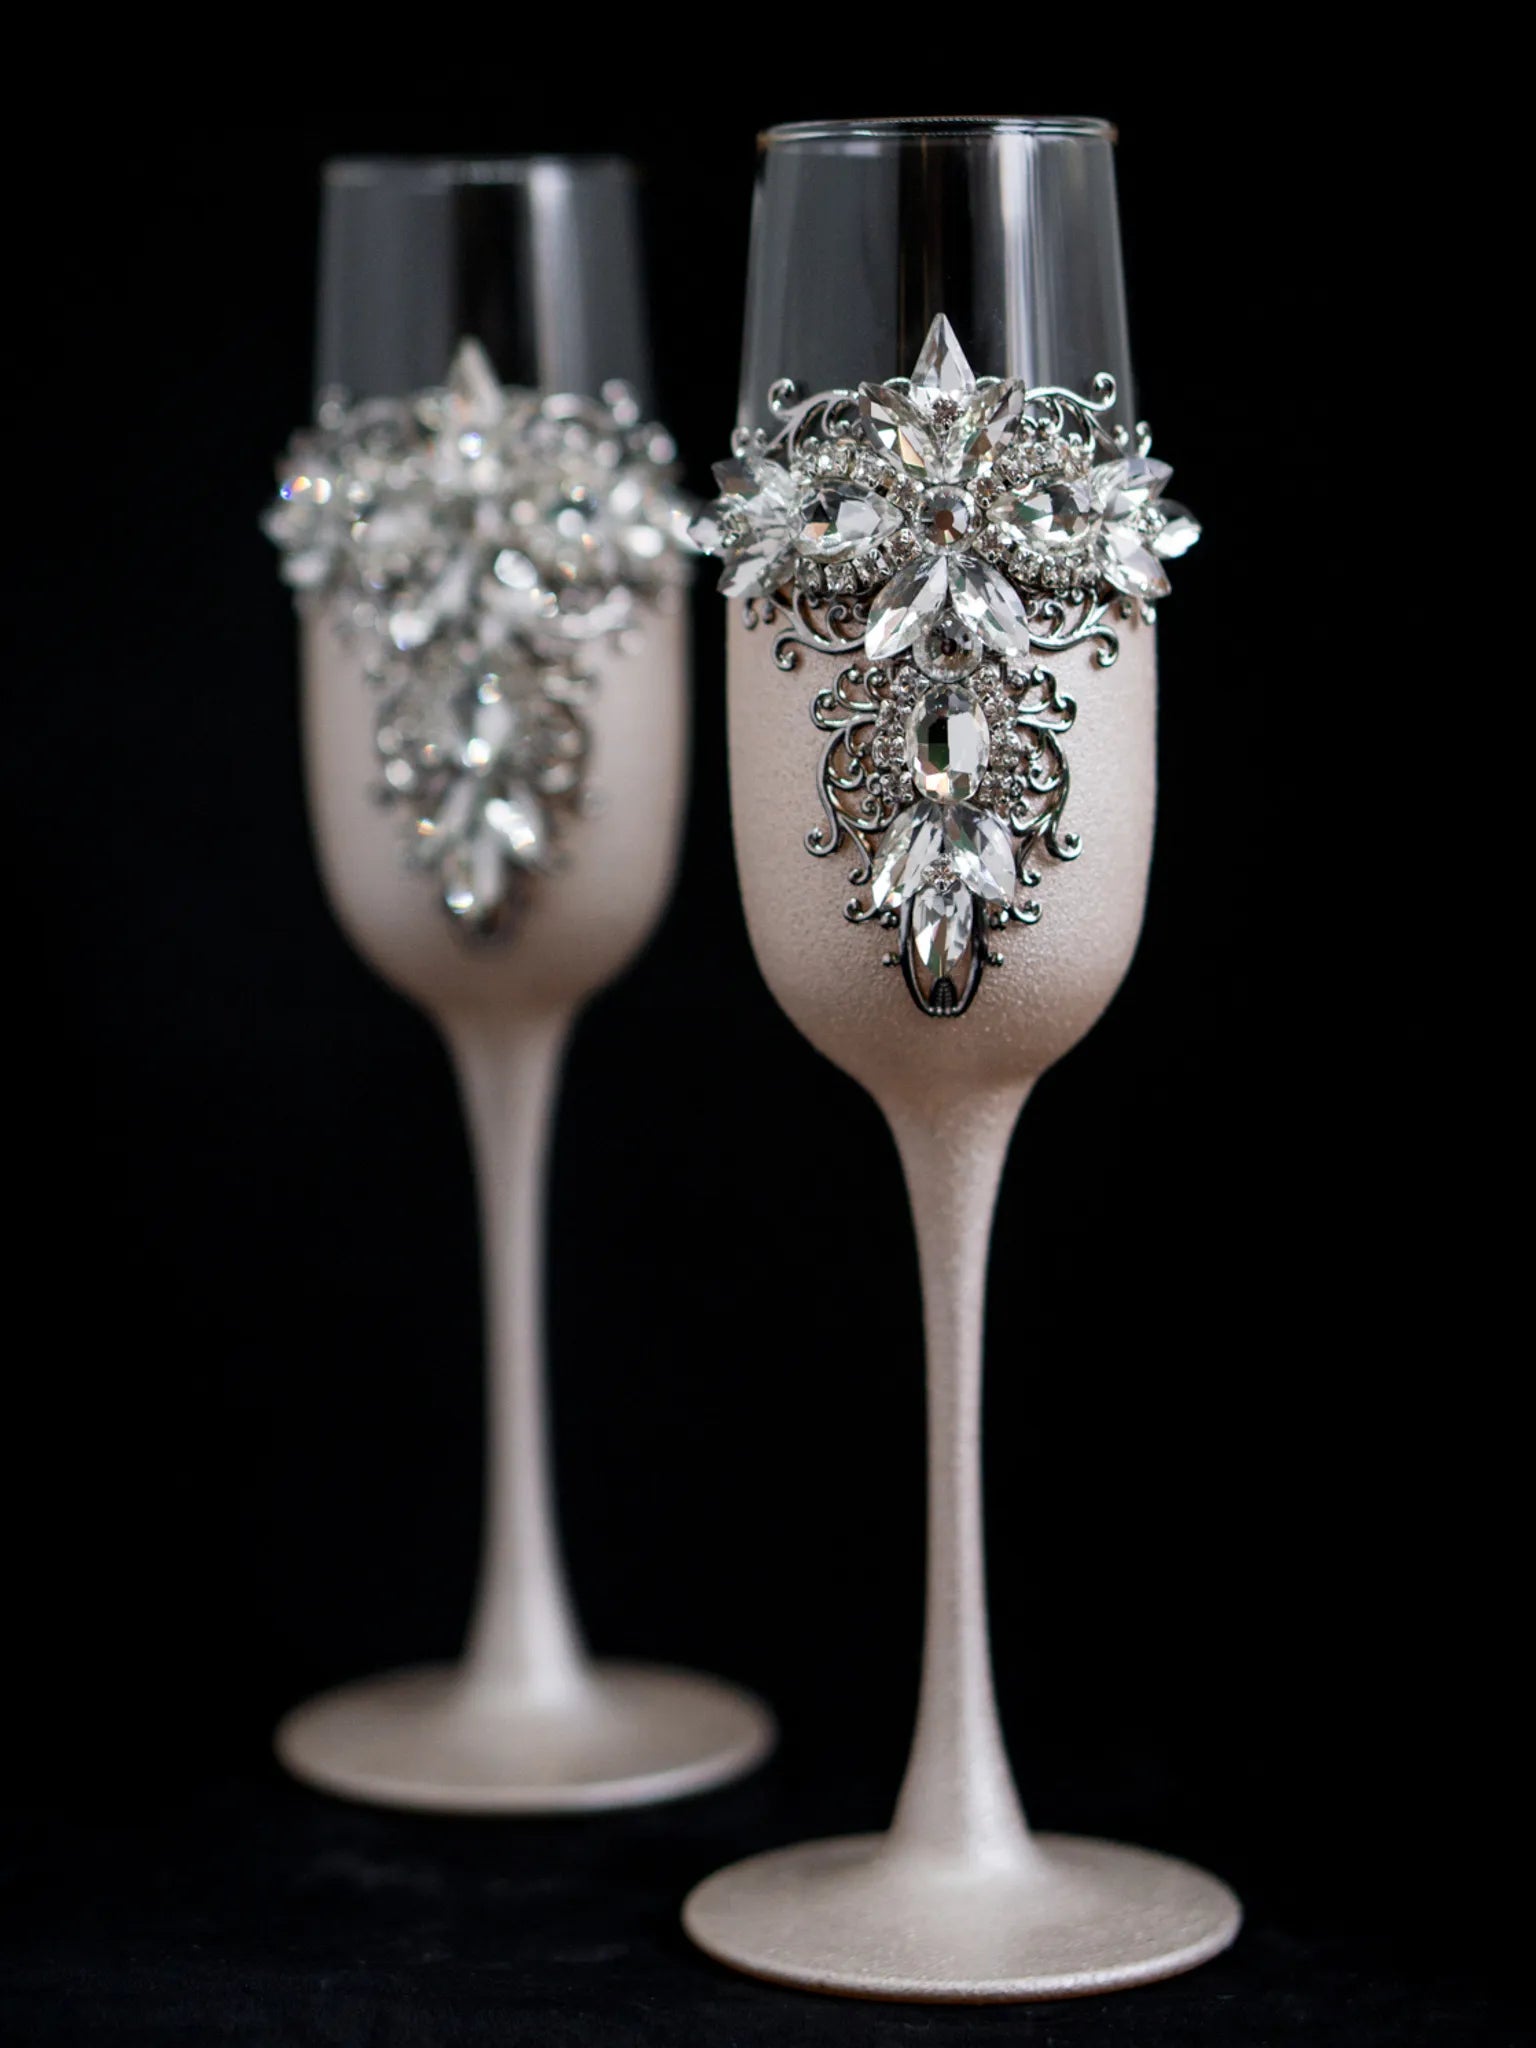 Unique ivory and silver crystal flutes